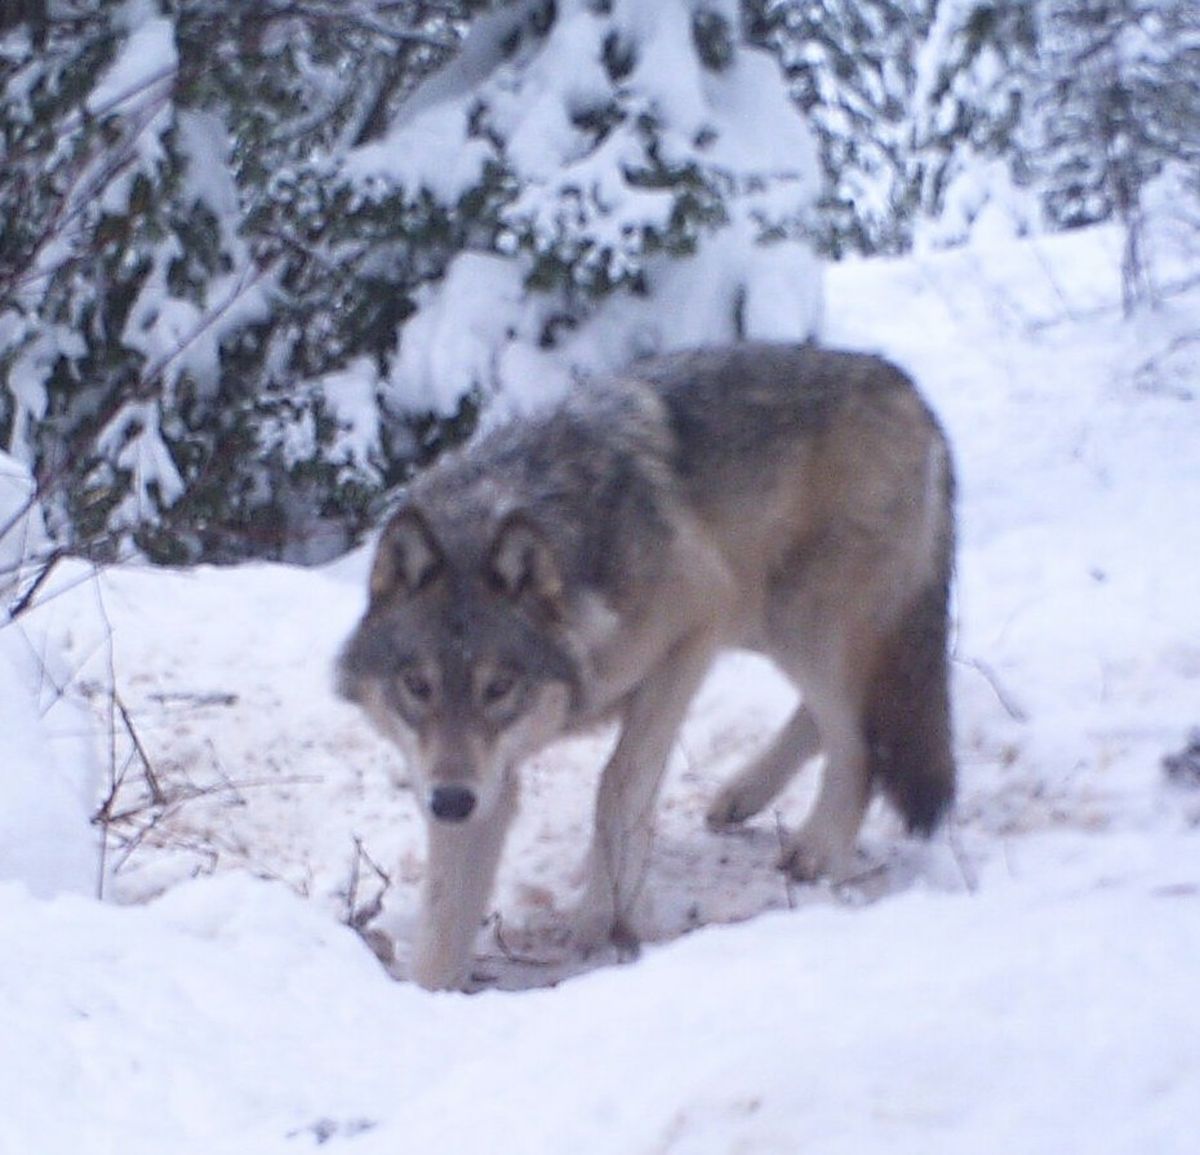 Huckleberry Pack alpha male gray wolf was captured and fitted with a GPS tracking collar.